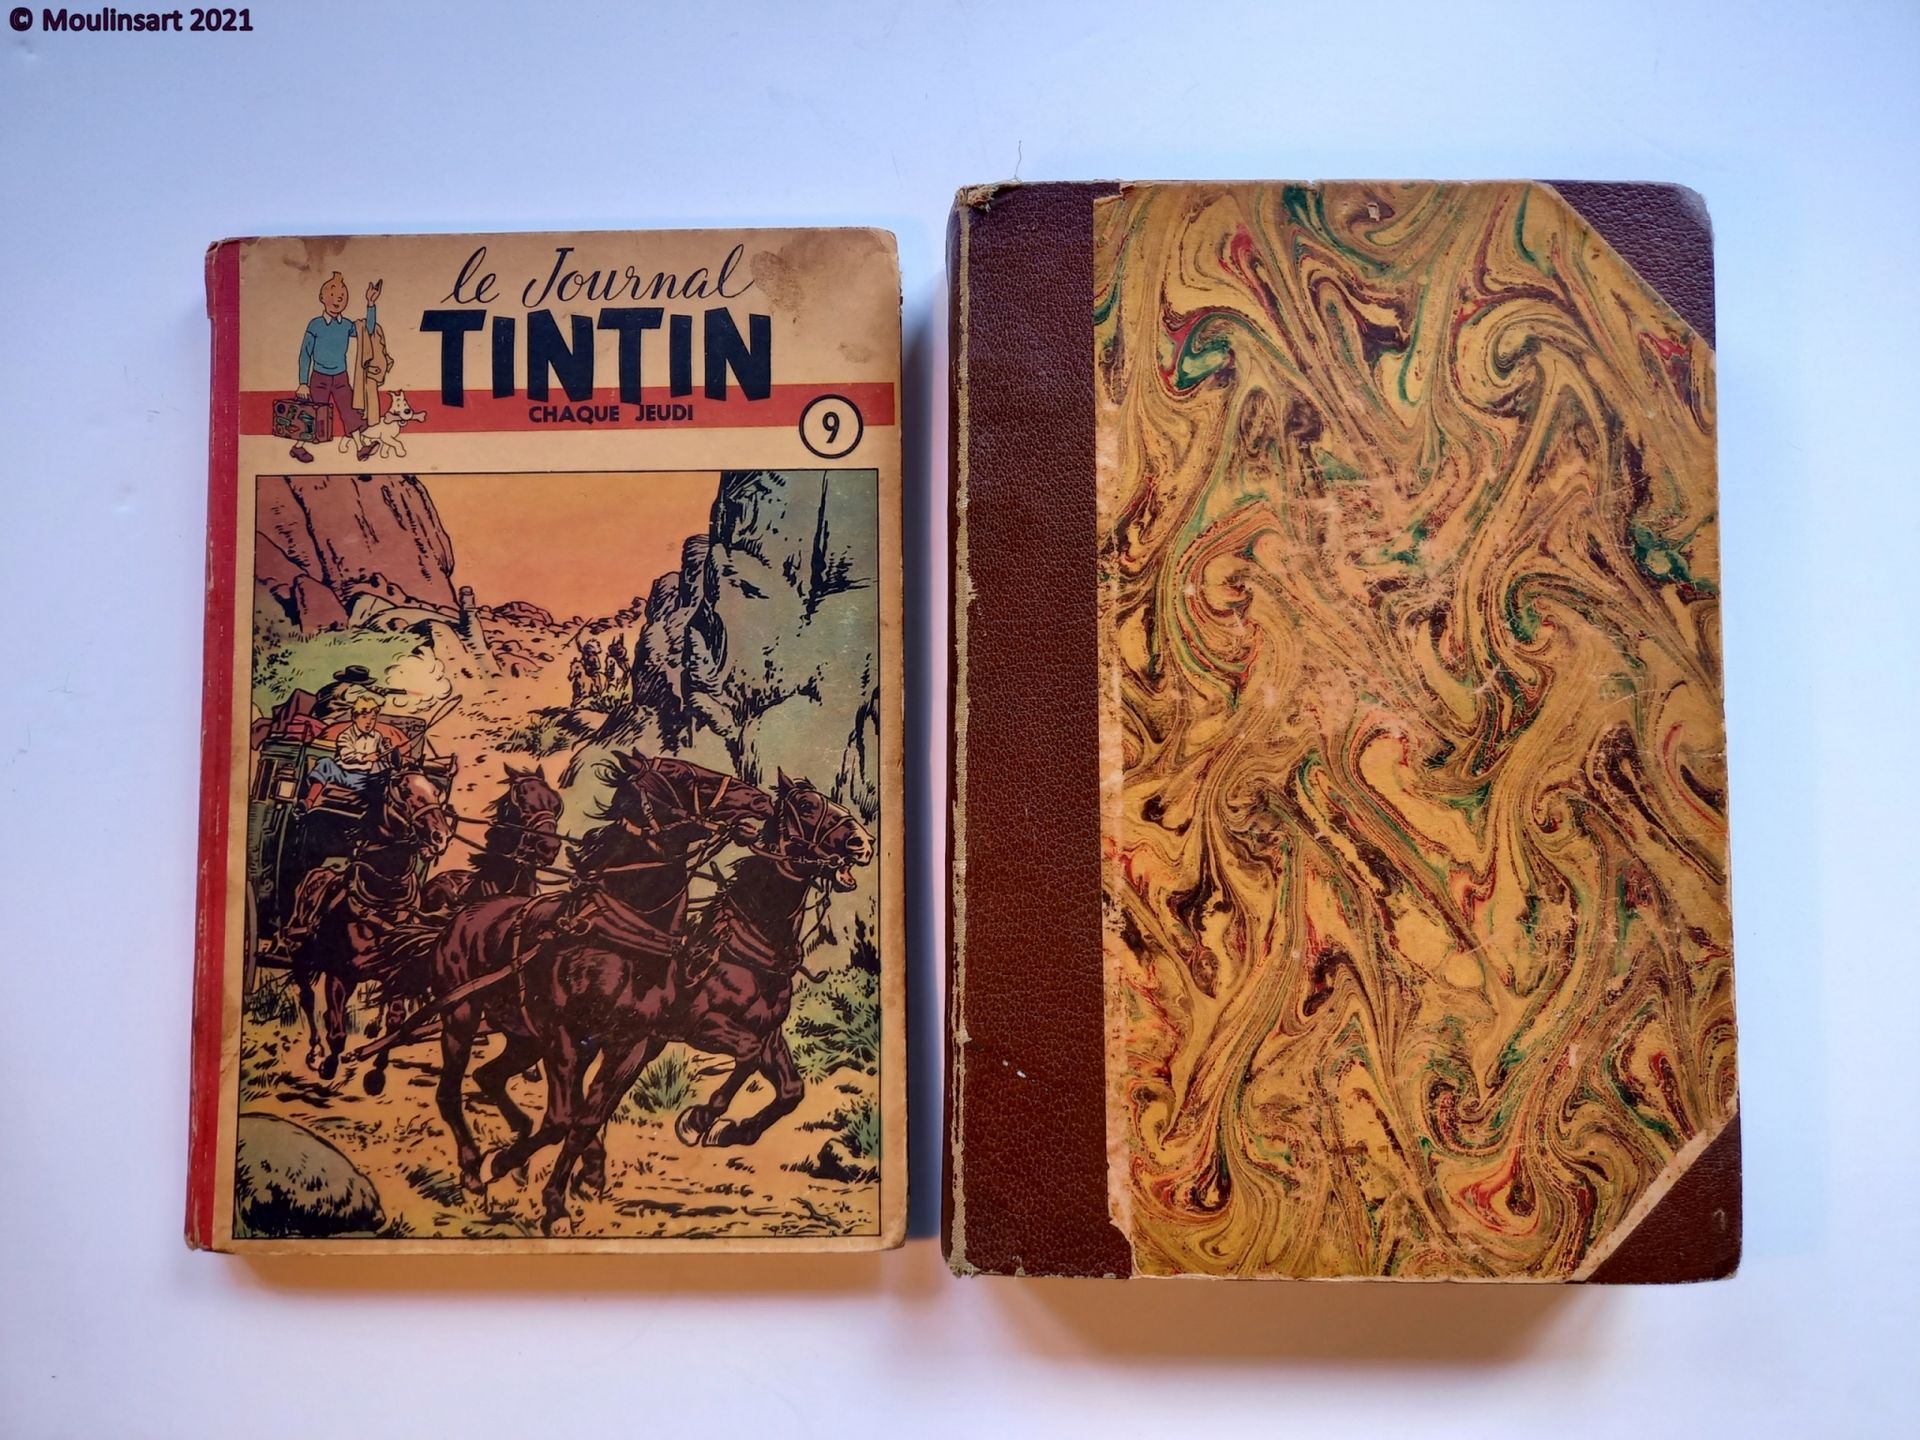 HERGÉ HERGE

Tintin" newspaper with publisher's binding number 9 and a "house" b&hellip;